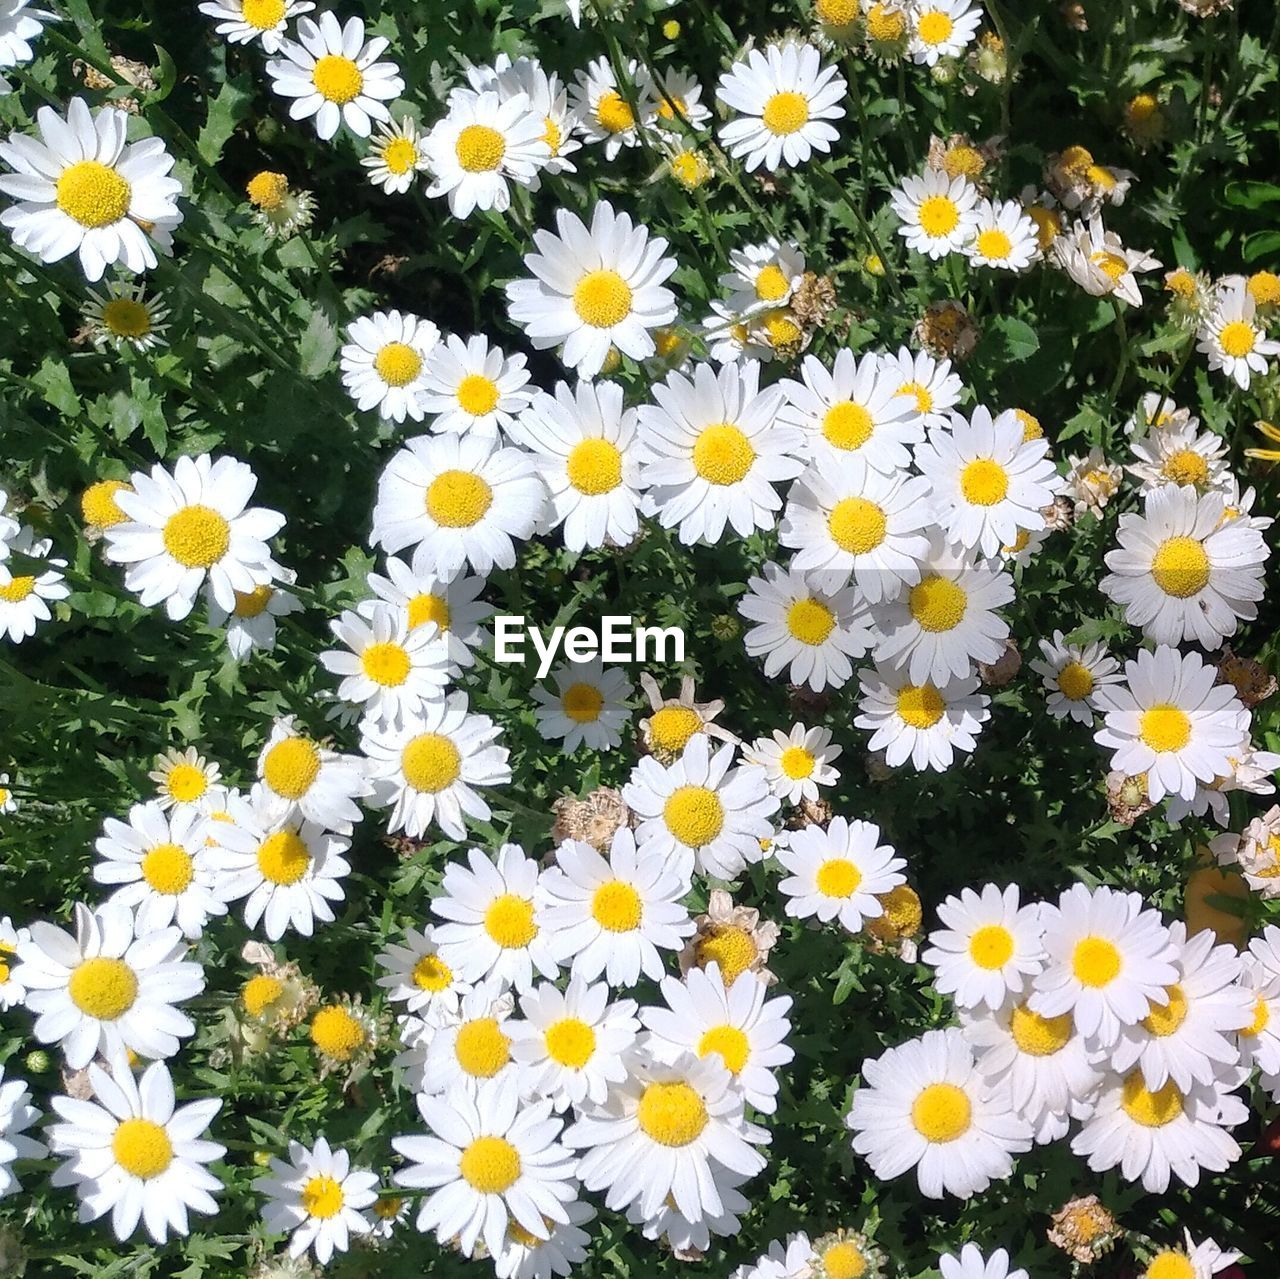 CLOSE-UP OF DAISY FLOWERS BLOOMING ON FIELD